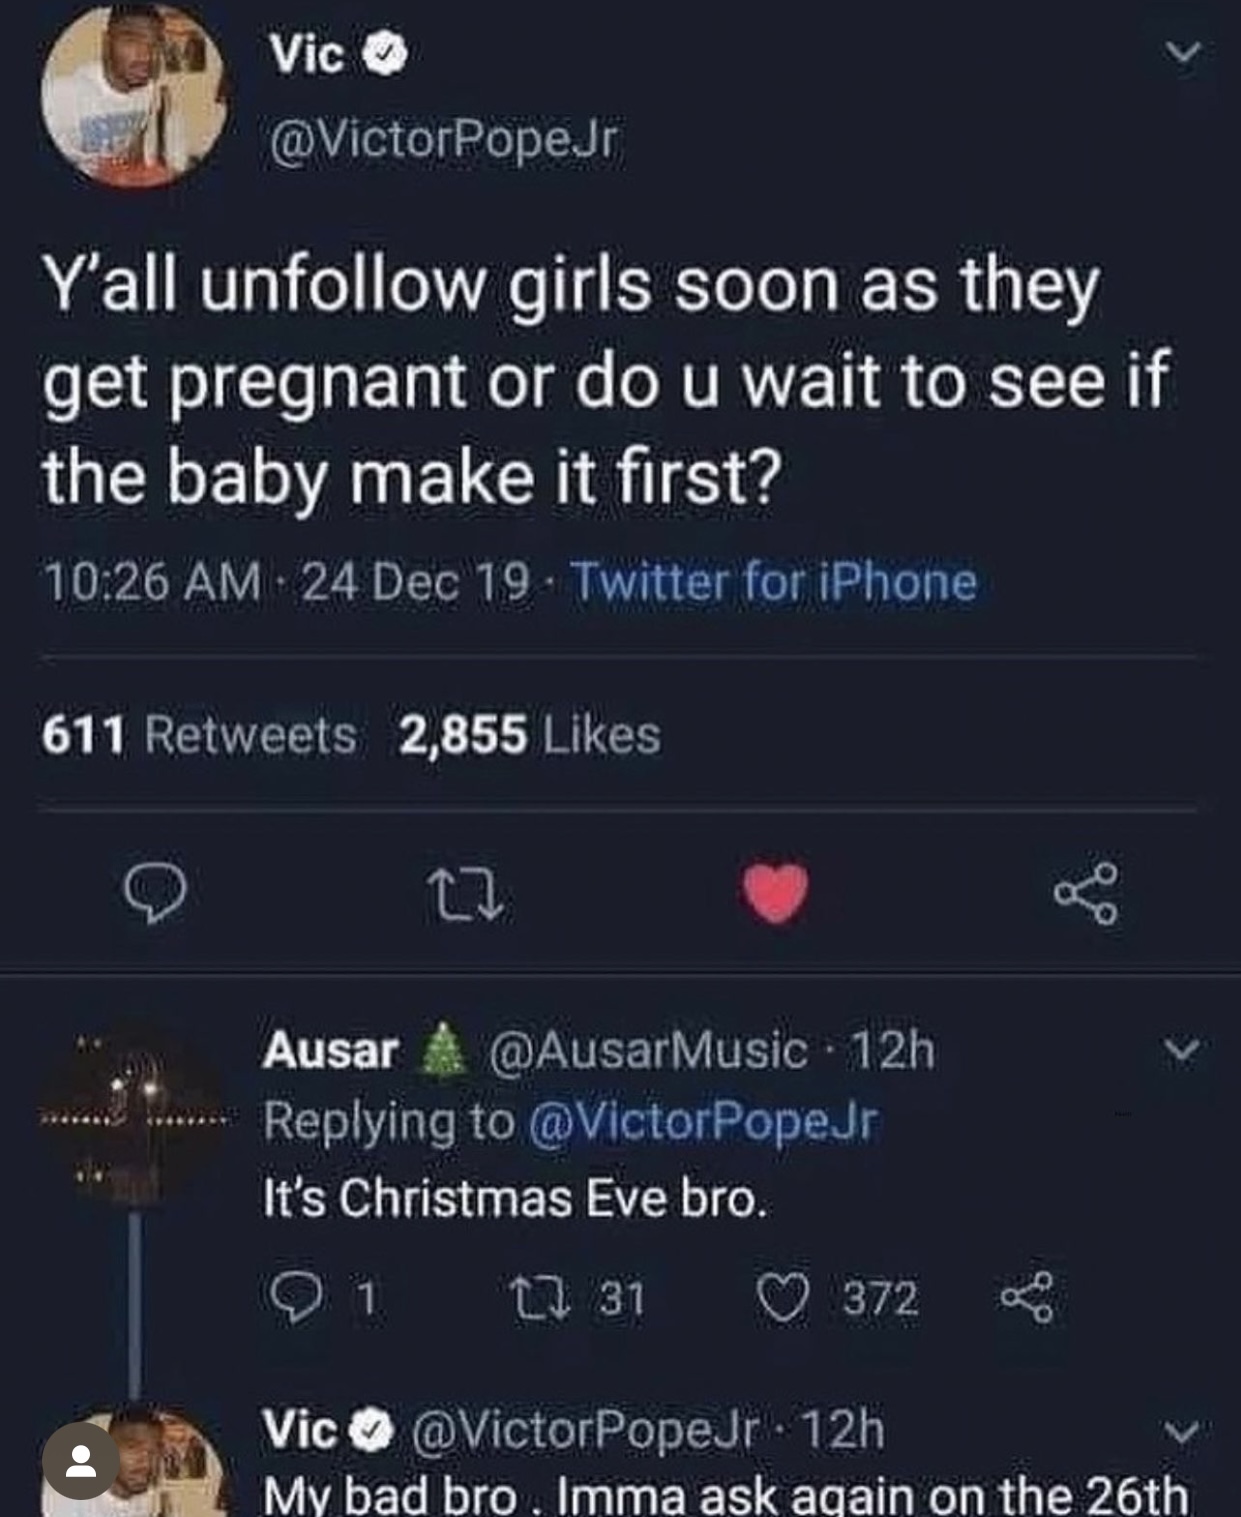 the internet hall of shame - Funny meme - Vic Y'all un girls soon as they get pregnant or do u wait to see if the baby make it first? 24 Dec 19 Twitter for iPhone 611 2,855 27 Ausar 12h It's Christmas Eve bro. 9 1 31 372 Vic PopeJr. 12h My bad bro. Imma a